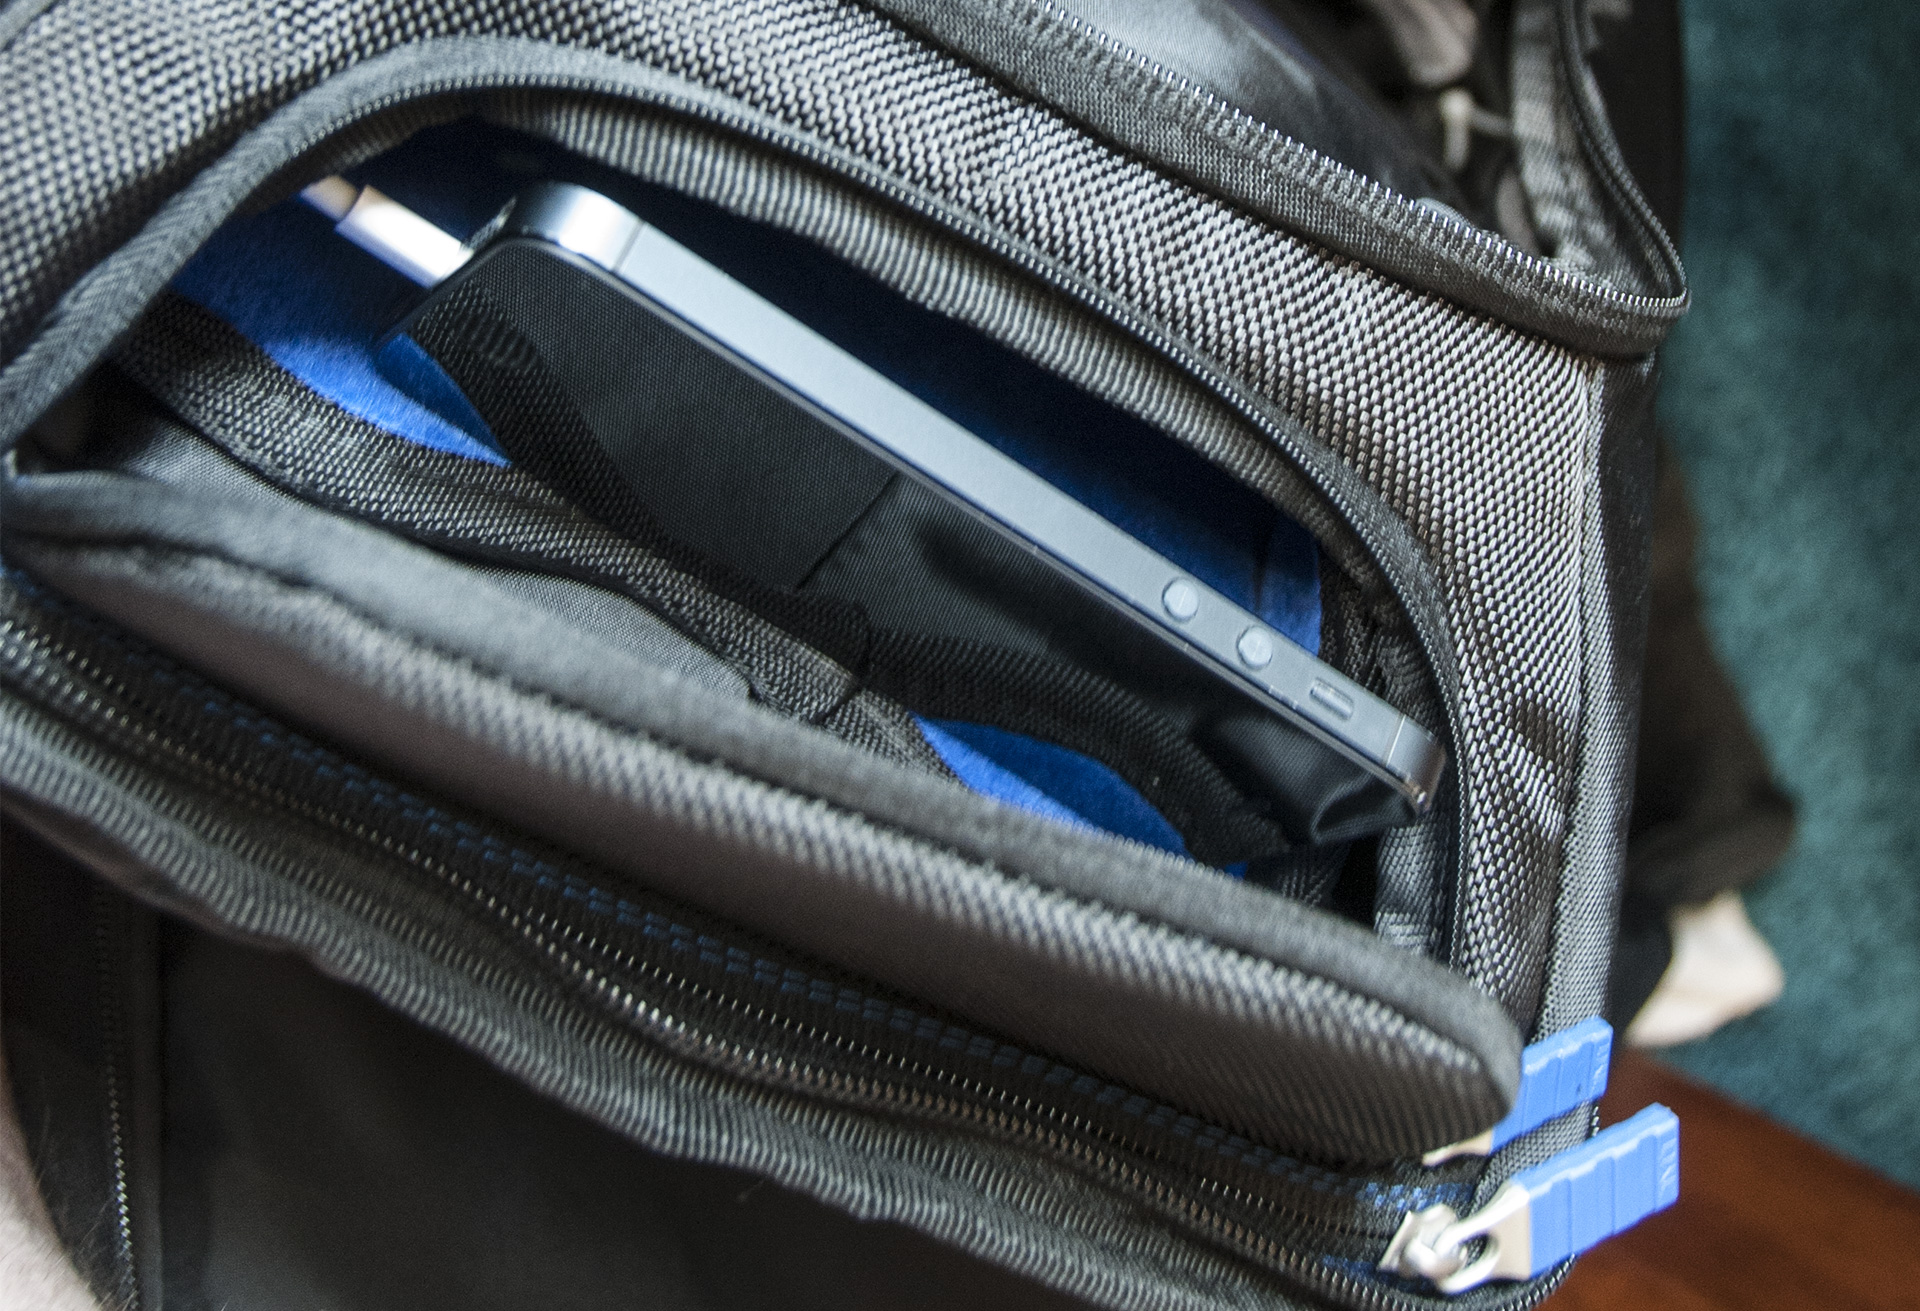 For instance, you can neatly route a cable into its well-placed "Protect Pocket," a hardened shell that's just the right size to fit your smartphone in one side of its divider, and a pair of sunglasses in the other, protecting both from hard knocks or objects piled on top.